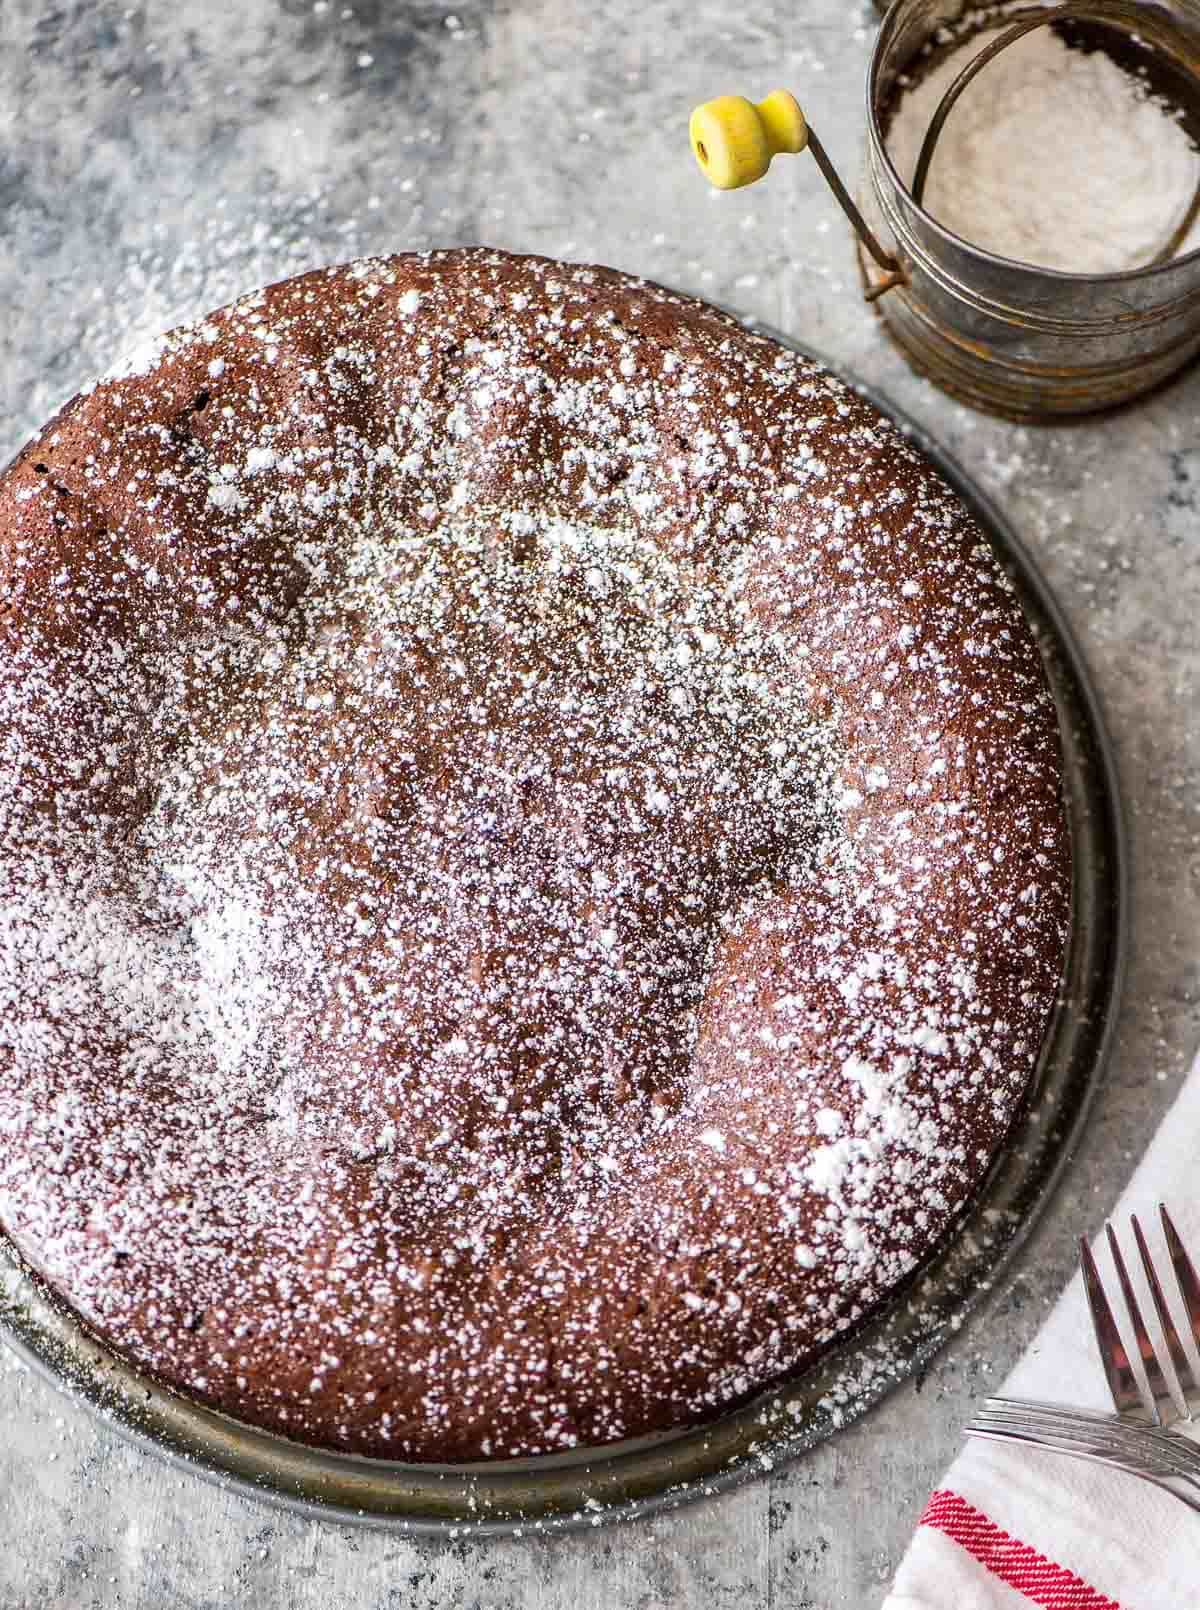 Flourless Chocolate Torte – Easy and impressive! Silky smooth, ultra chocolaty, and easy to make ahead! The perfect party dessert. Recipe at wellplated.com | @wellplated